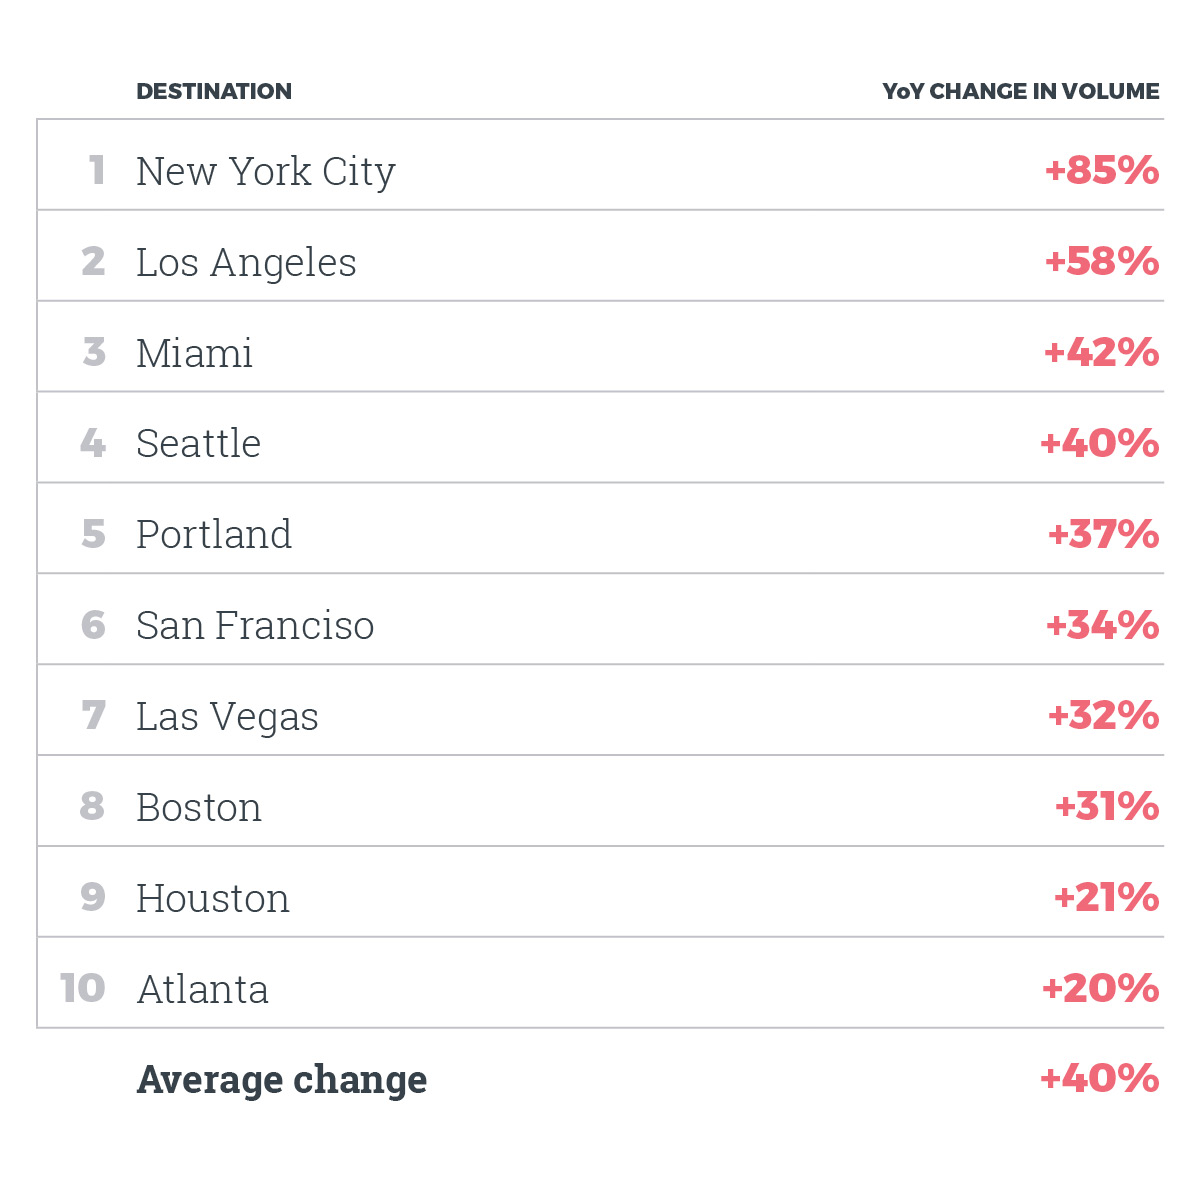 YOY change in online tourism conversation volume for 10 U.S. cities